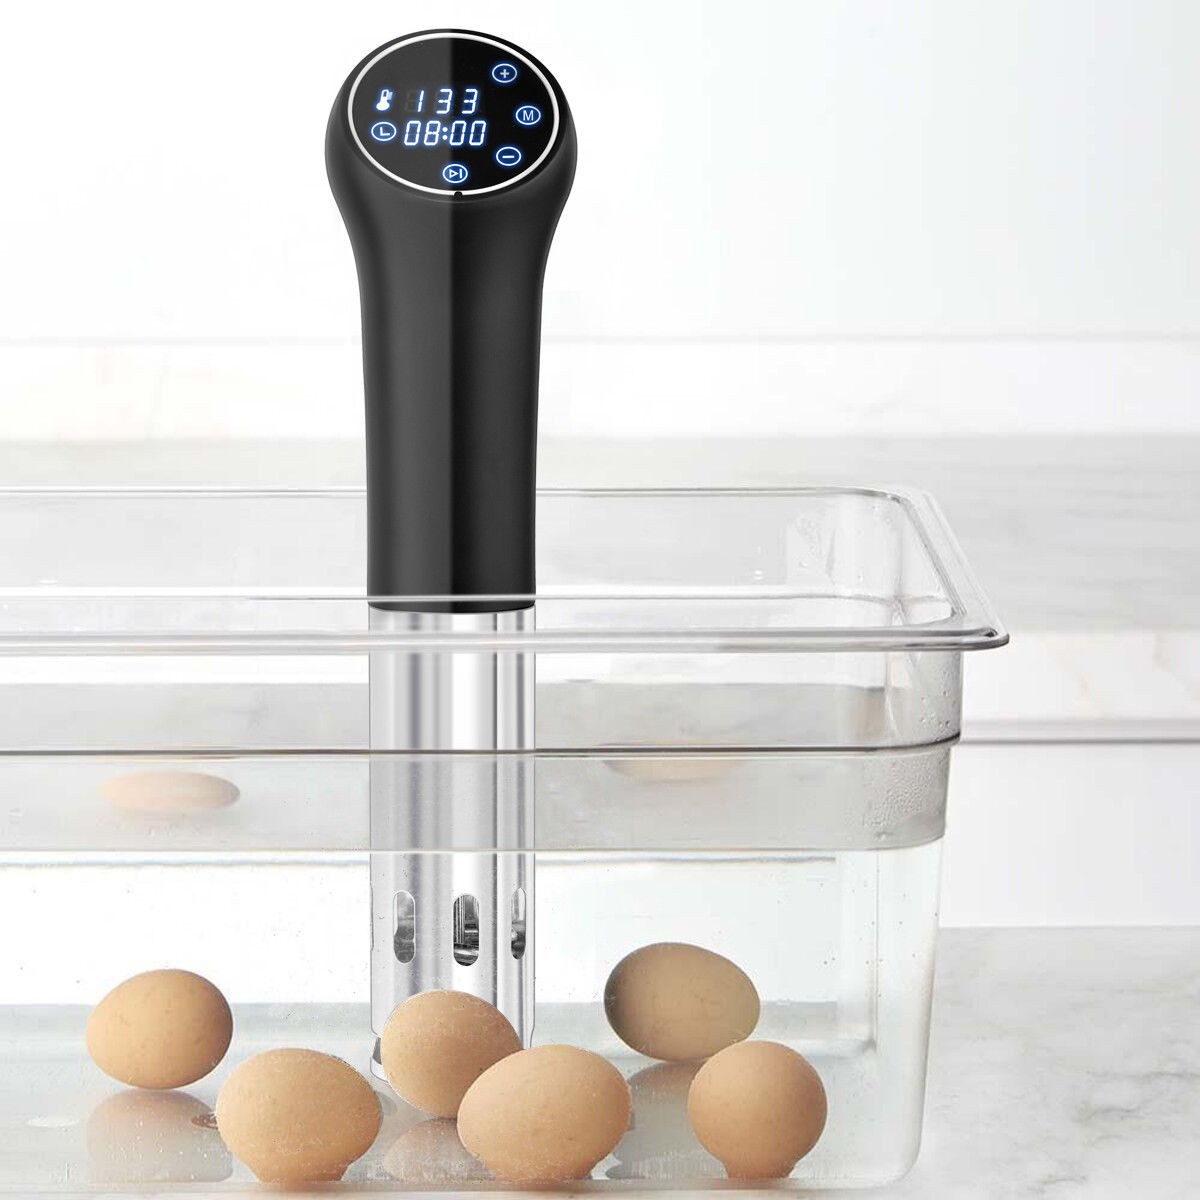 800W LED Display Thermal Immersion Sous Vide Precision Cooker